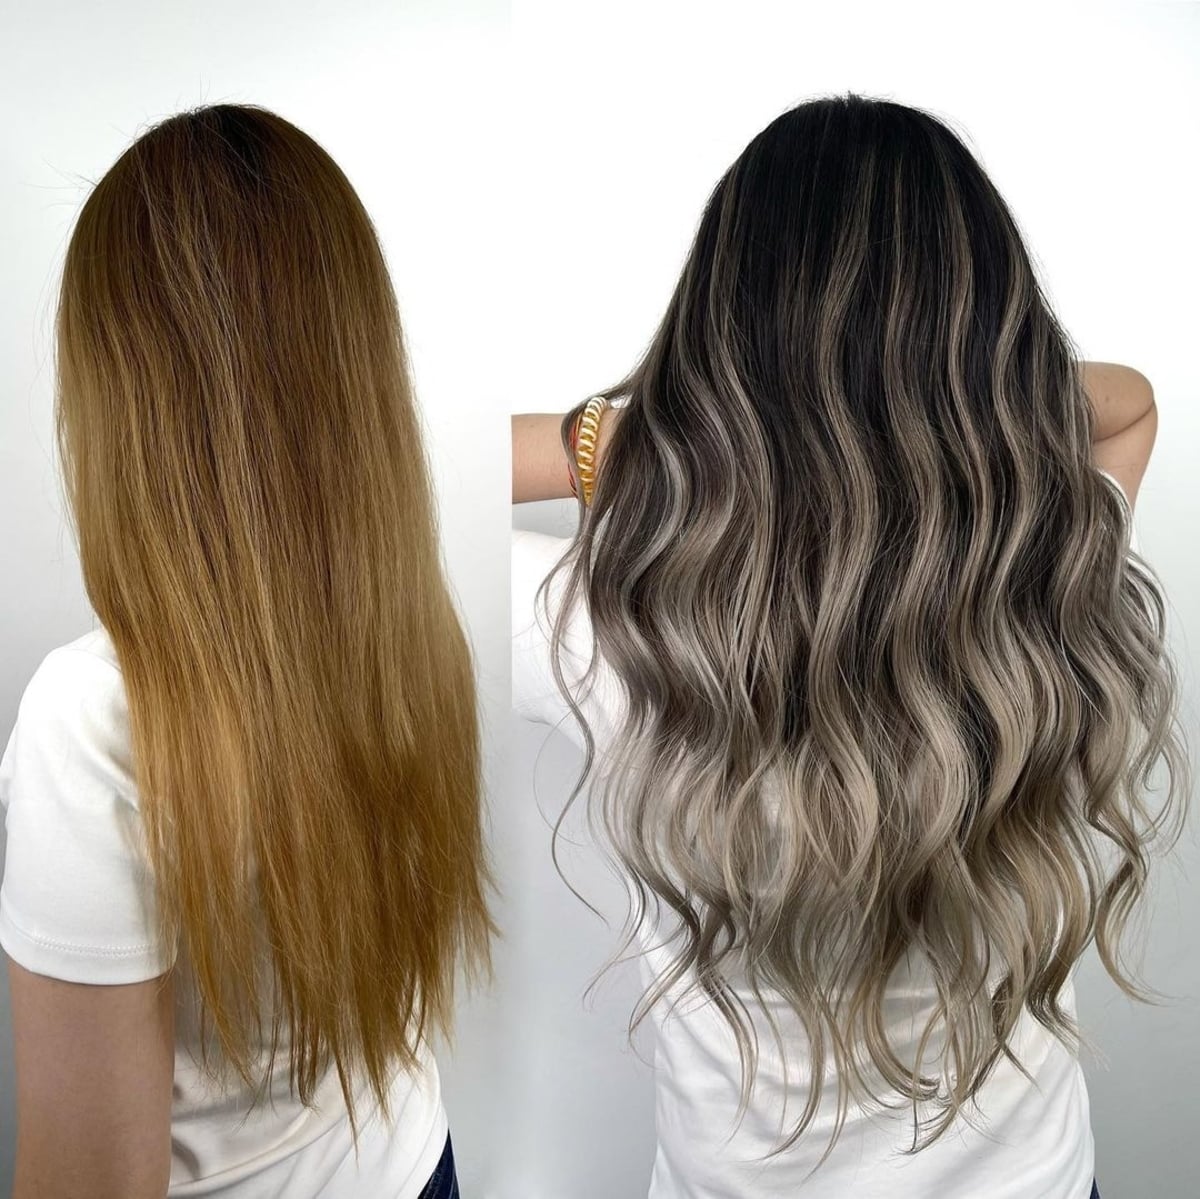 Before and after transformation of black-blonde hair color